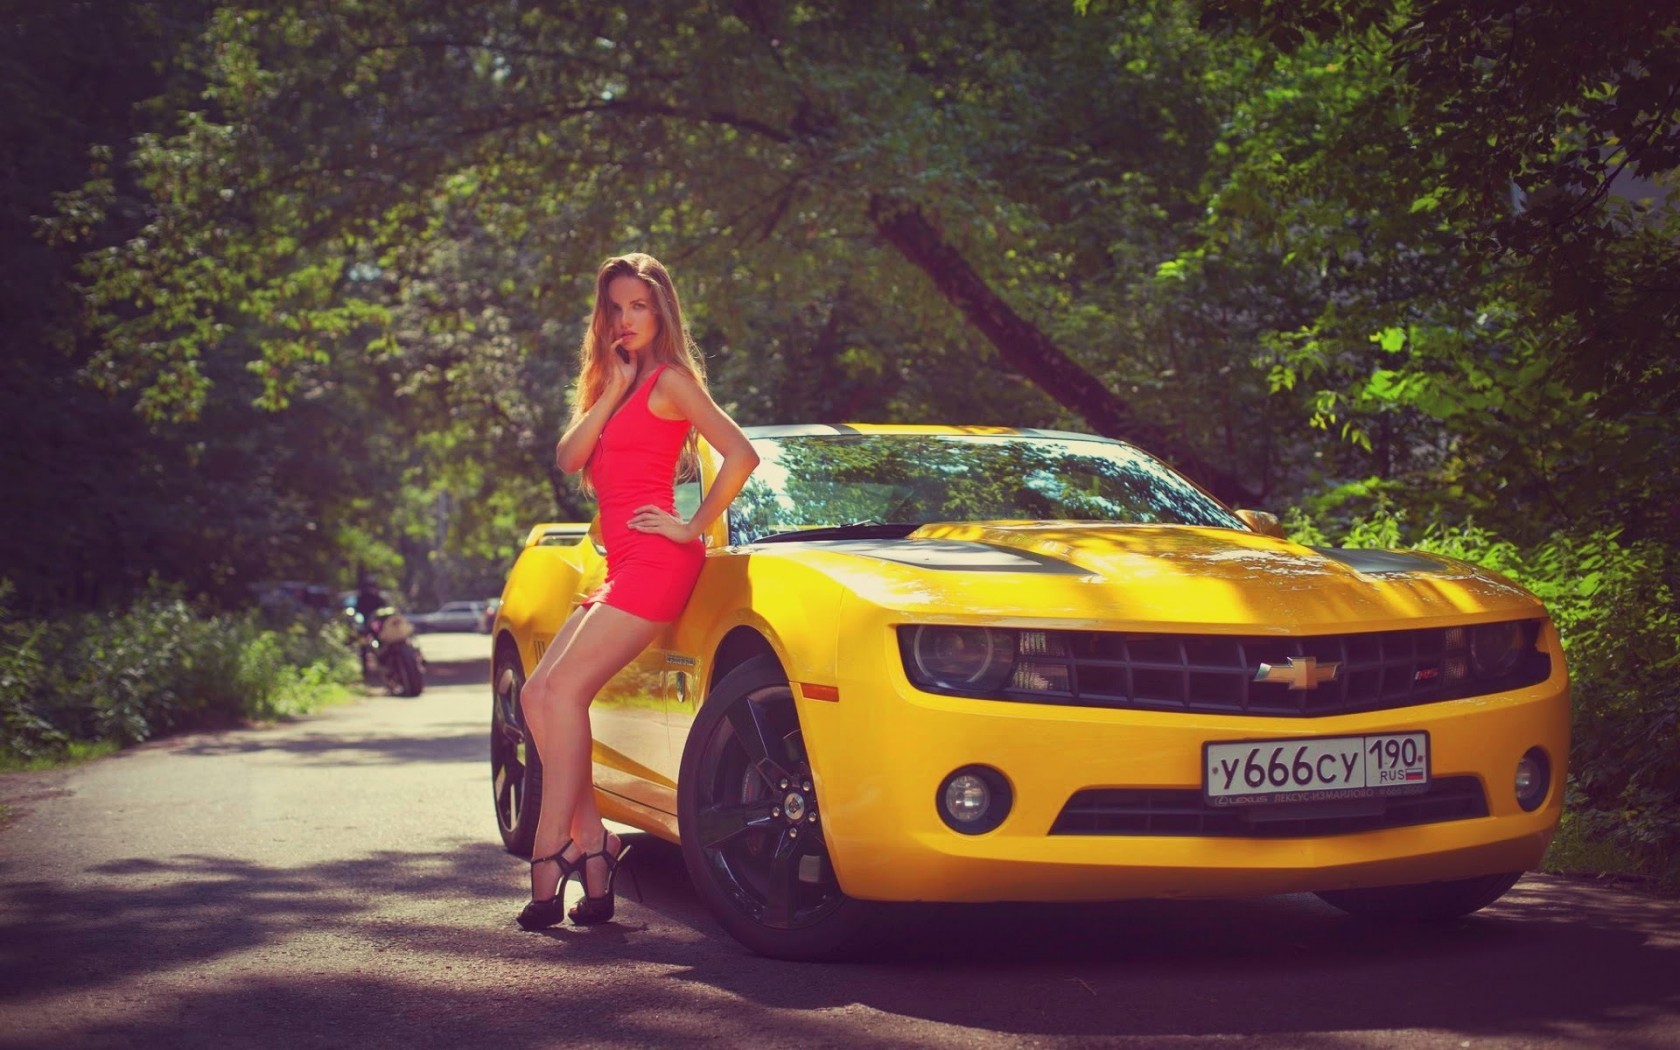 People 1680x1050 women model red dress Chevrolet Camaro Bumblebee high heels women with cars car vehicle leaning numbers women outdoors heels minidress looking at viewer Chevrolet American cars muscle cars